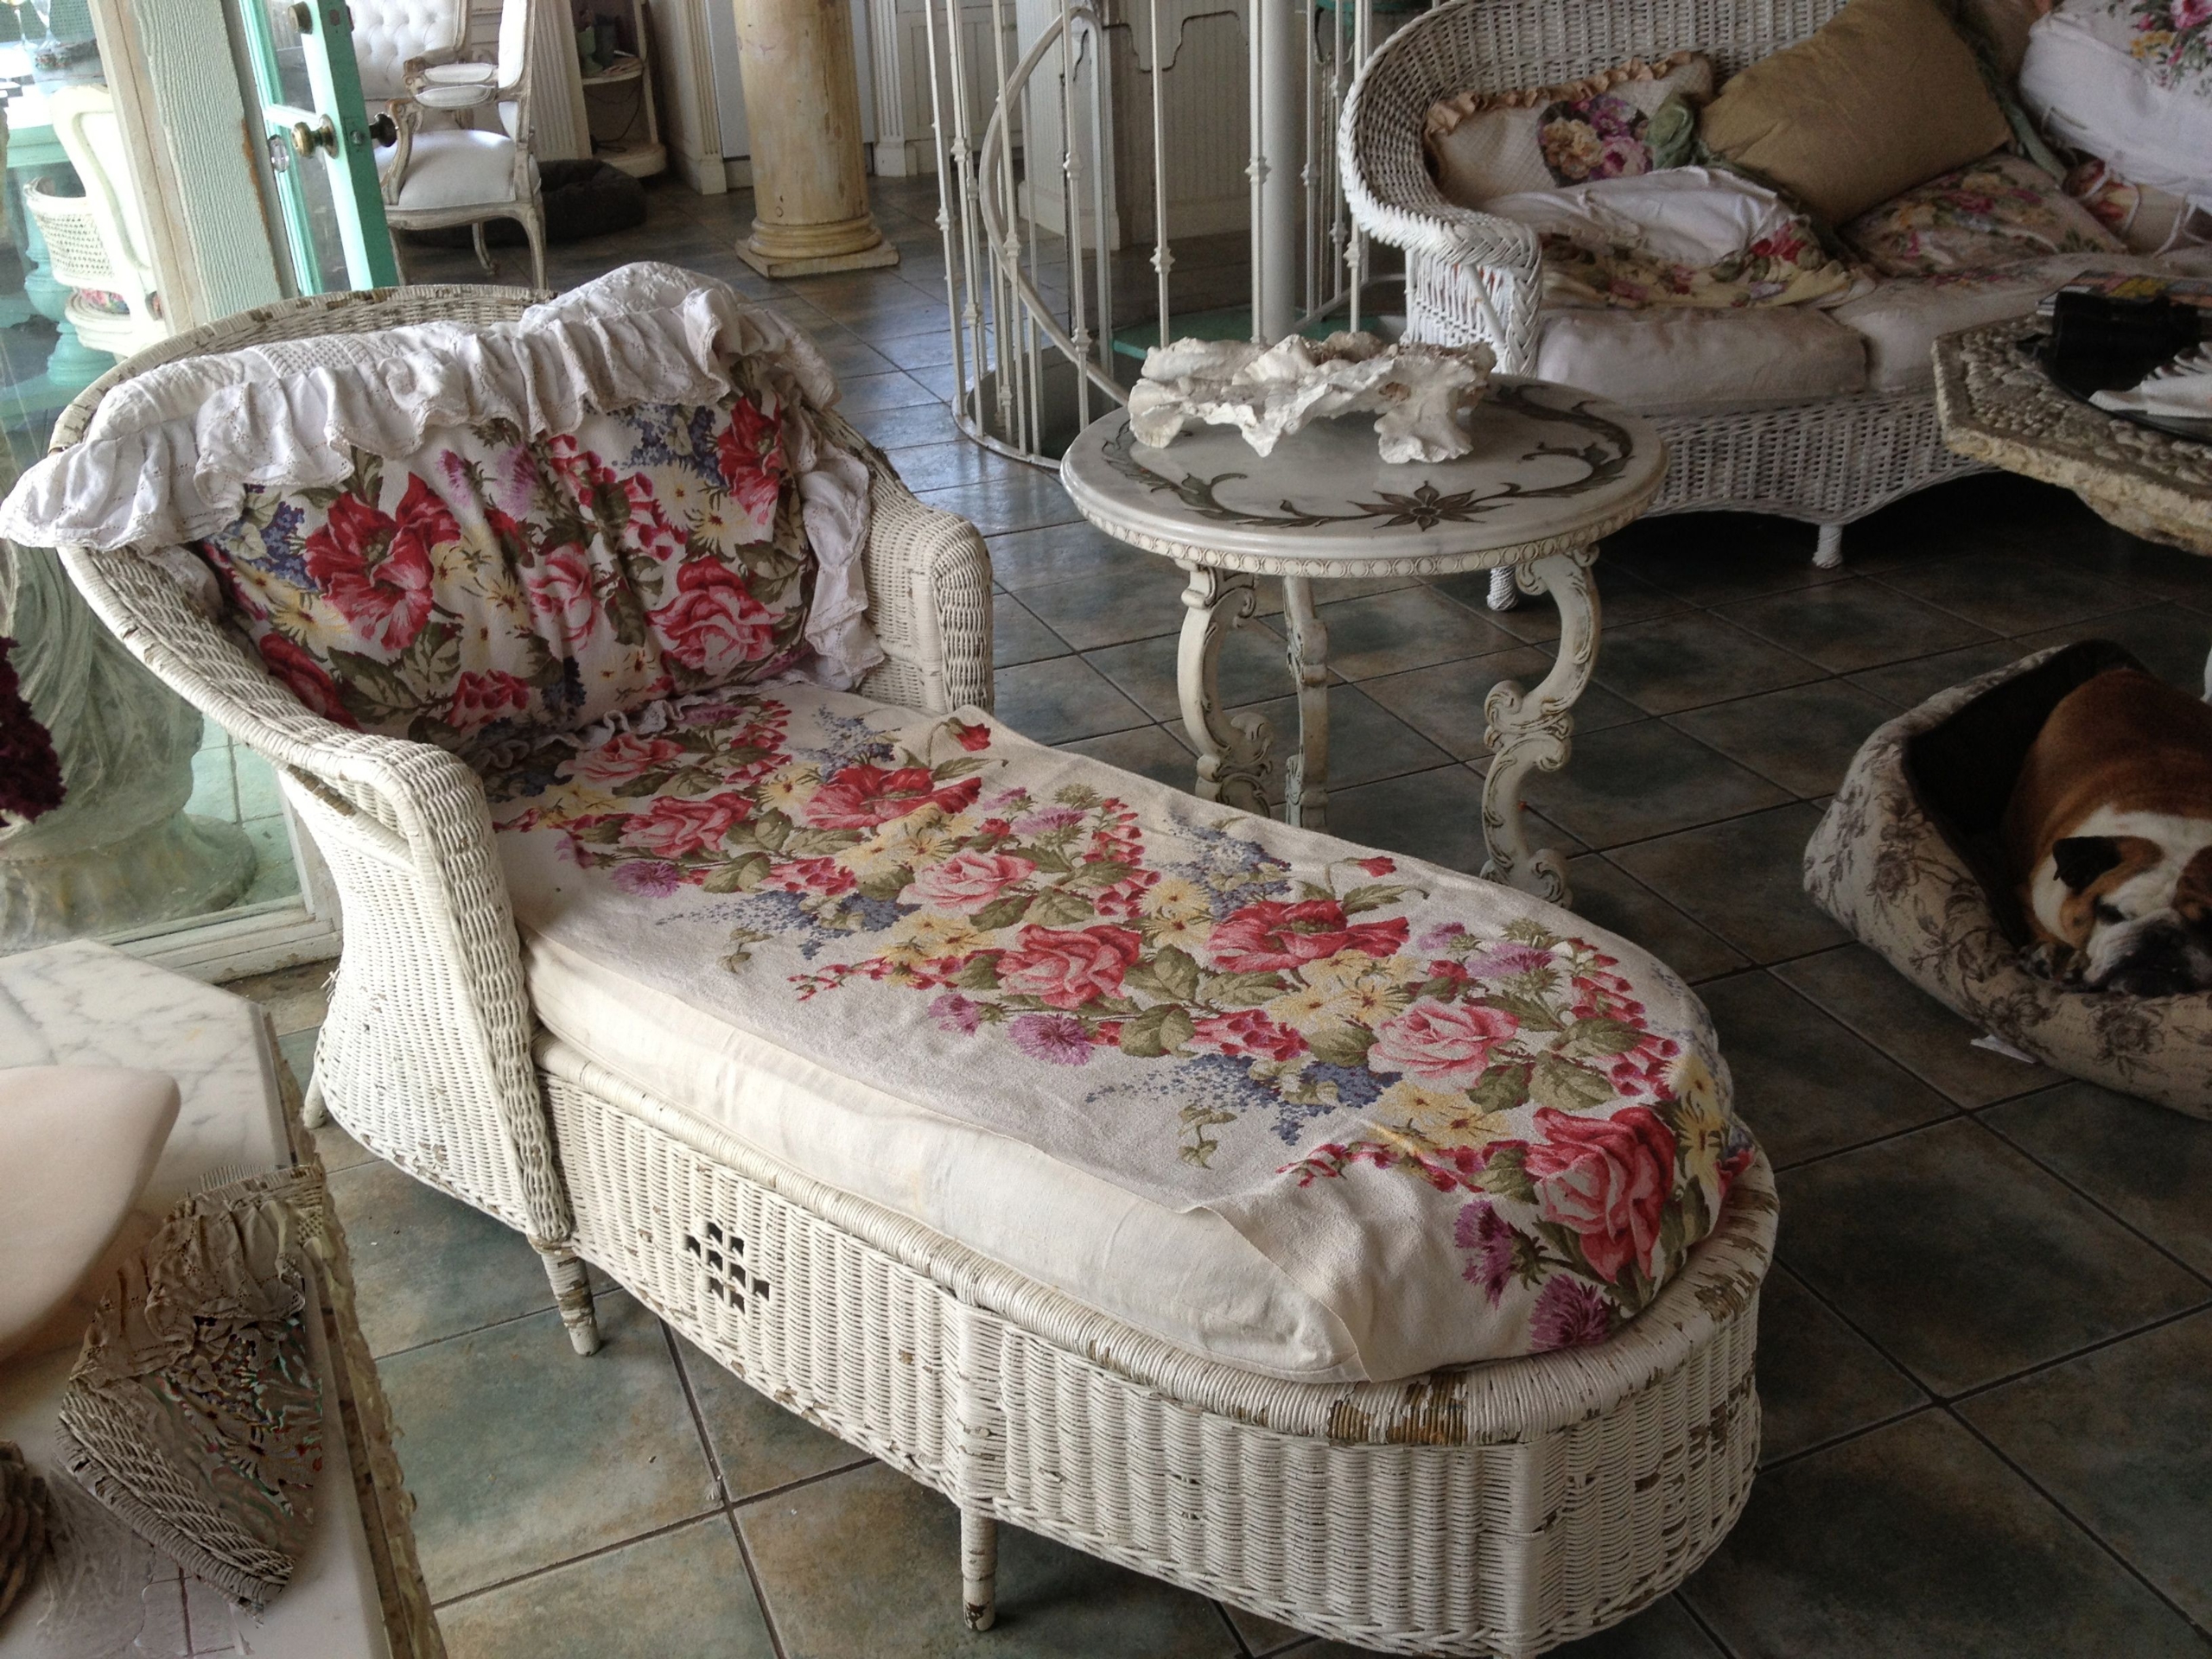 Antique wicker chaise lounge